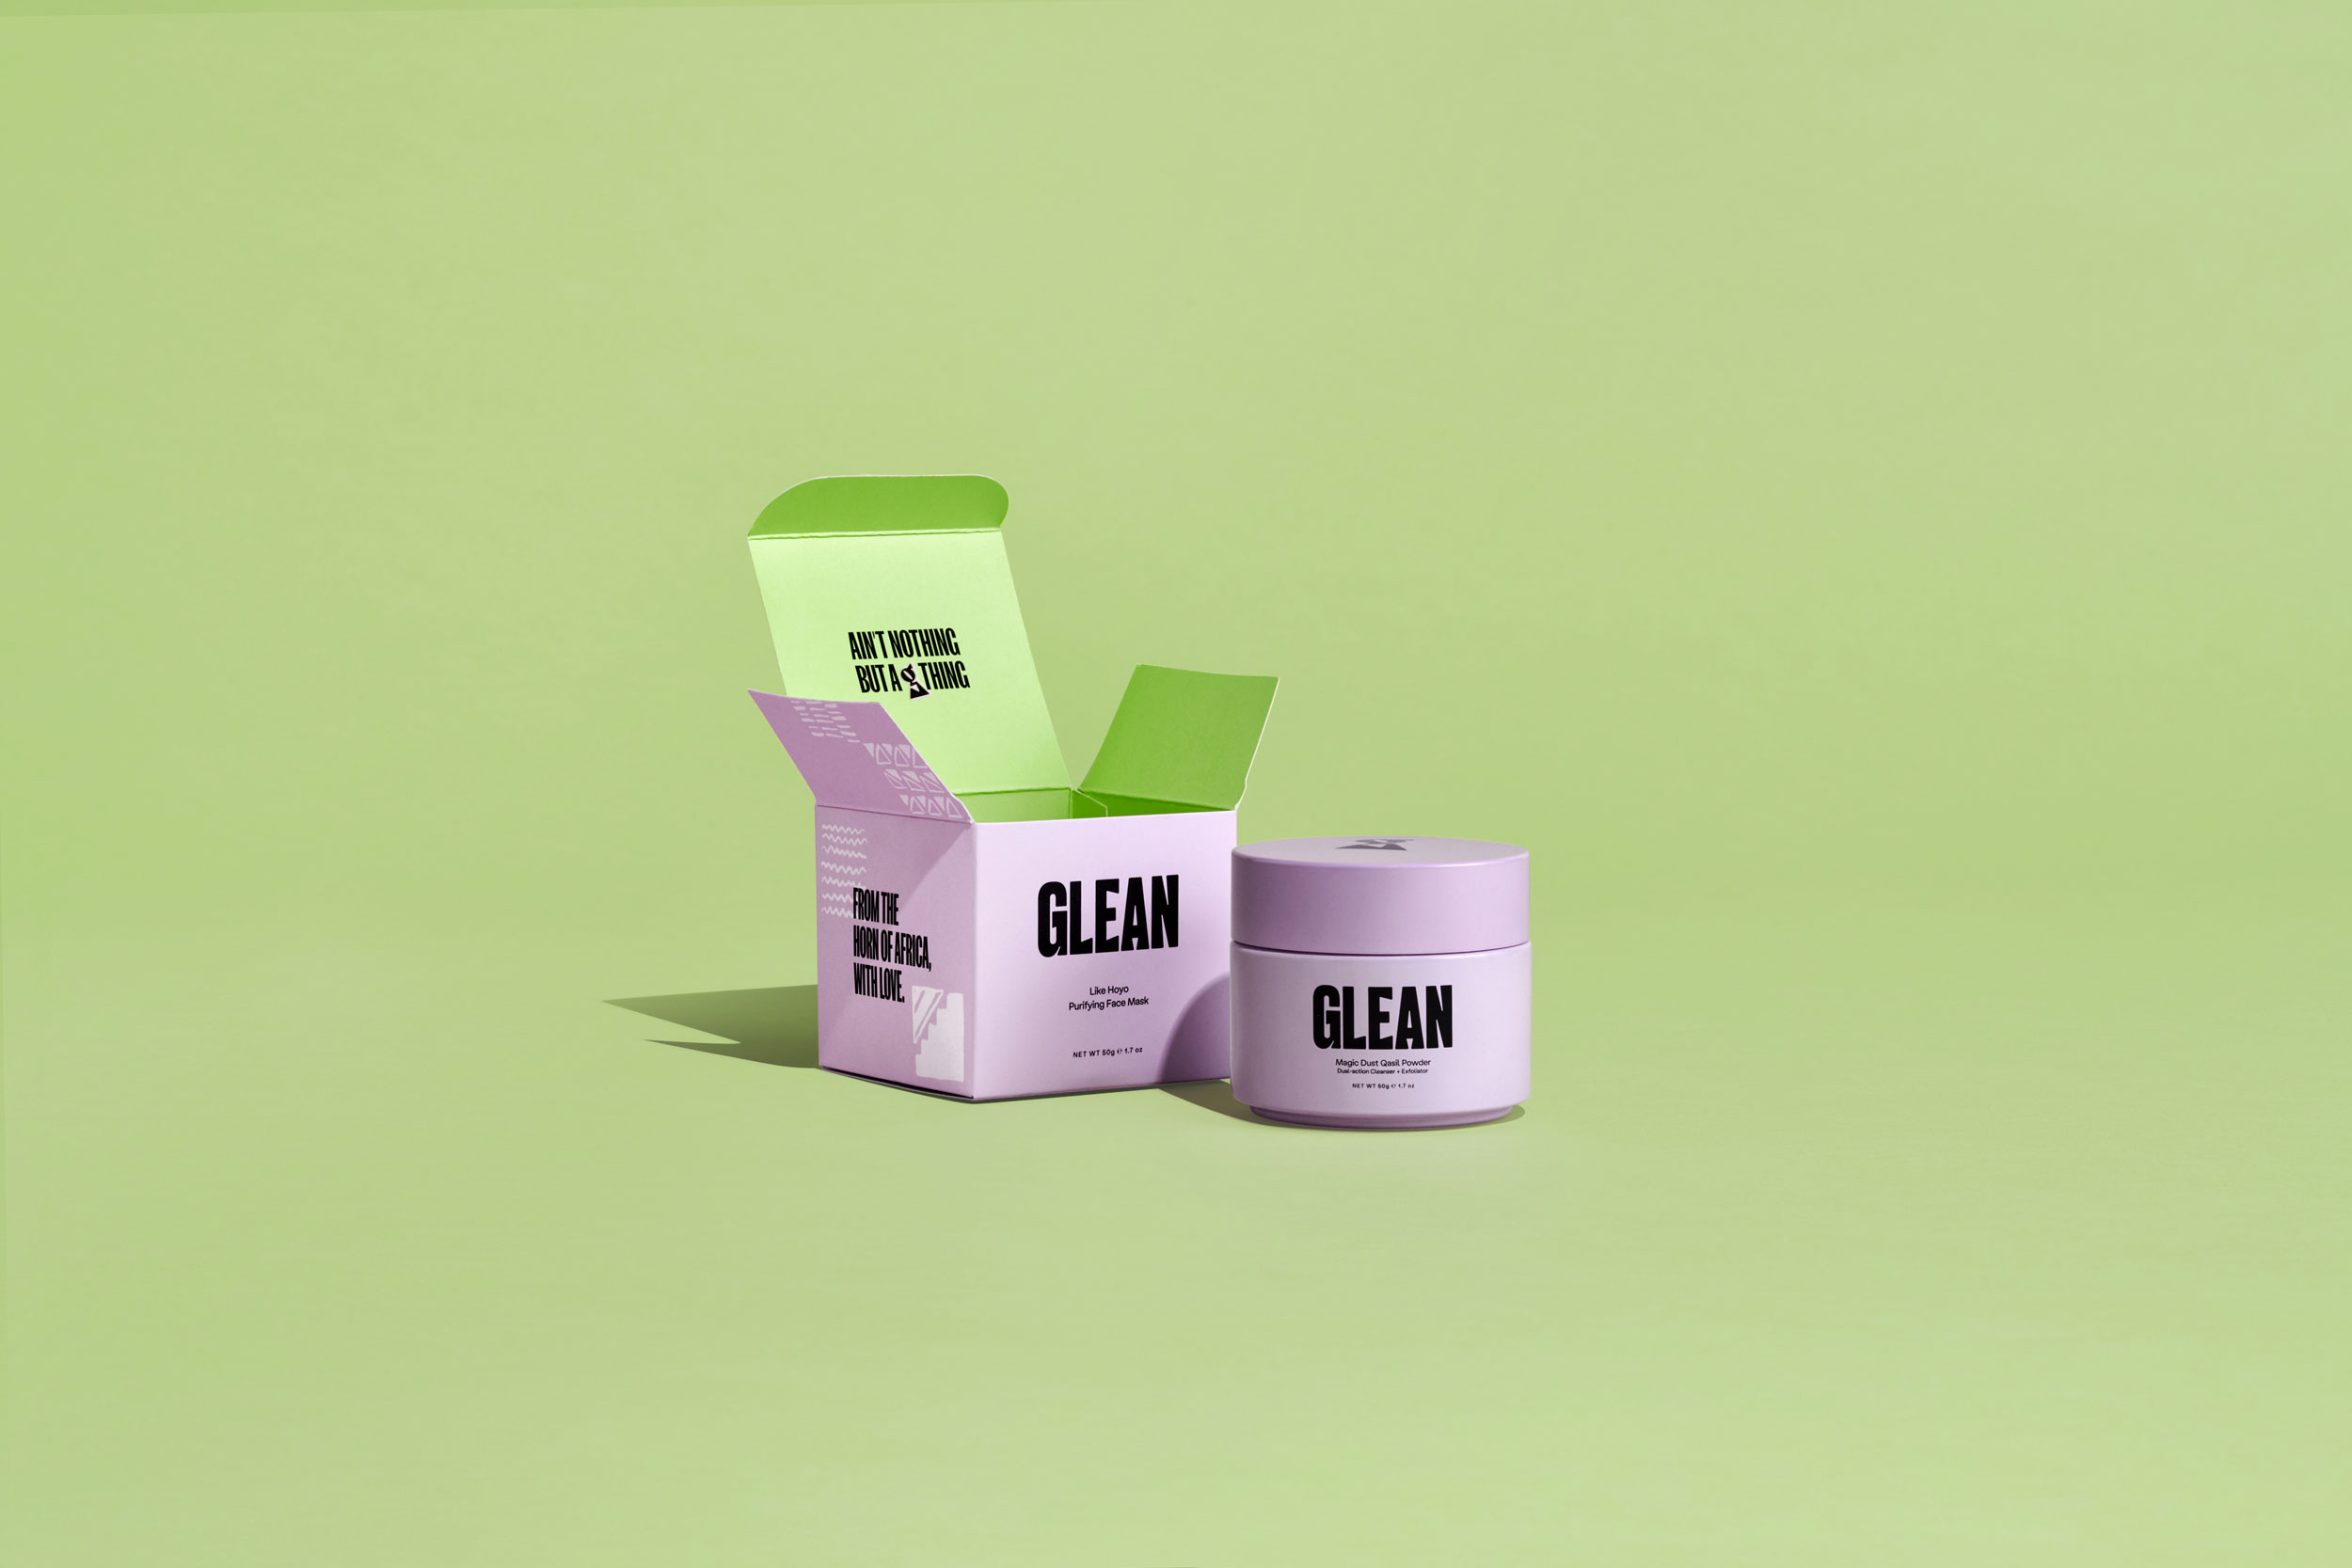 Skincare product with purple packaging and green interior on green sweep